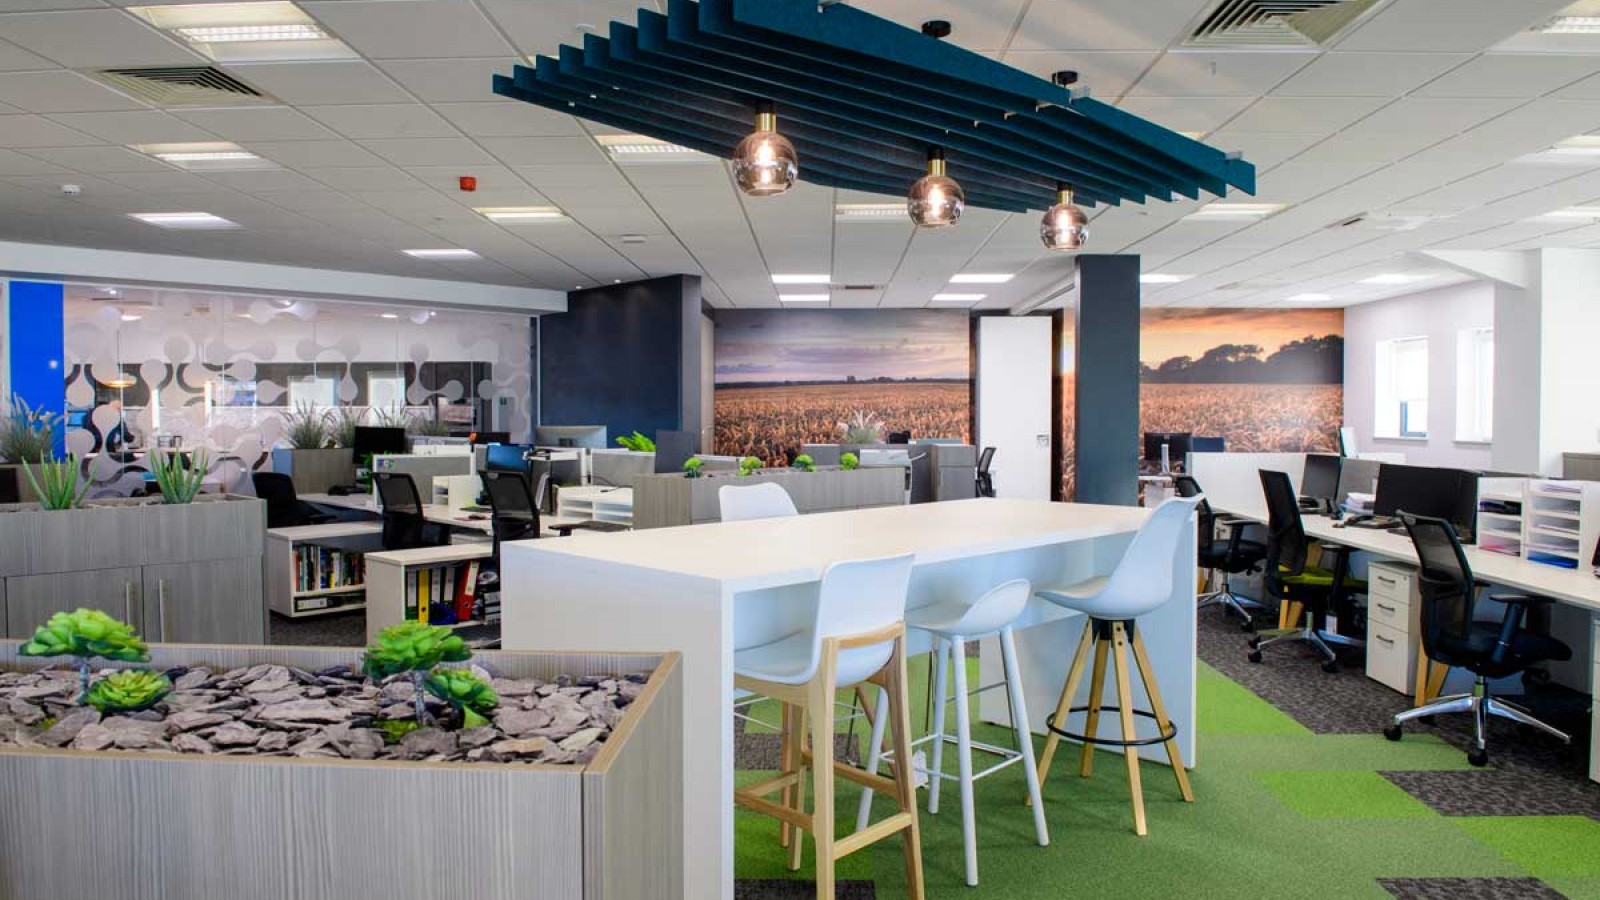 The interior of a newly refurbished office, with desks, high table, chairs, feature wall with mural, plants and green carpet